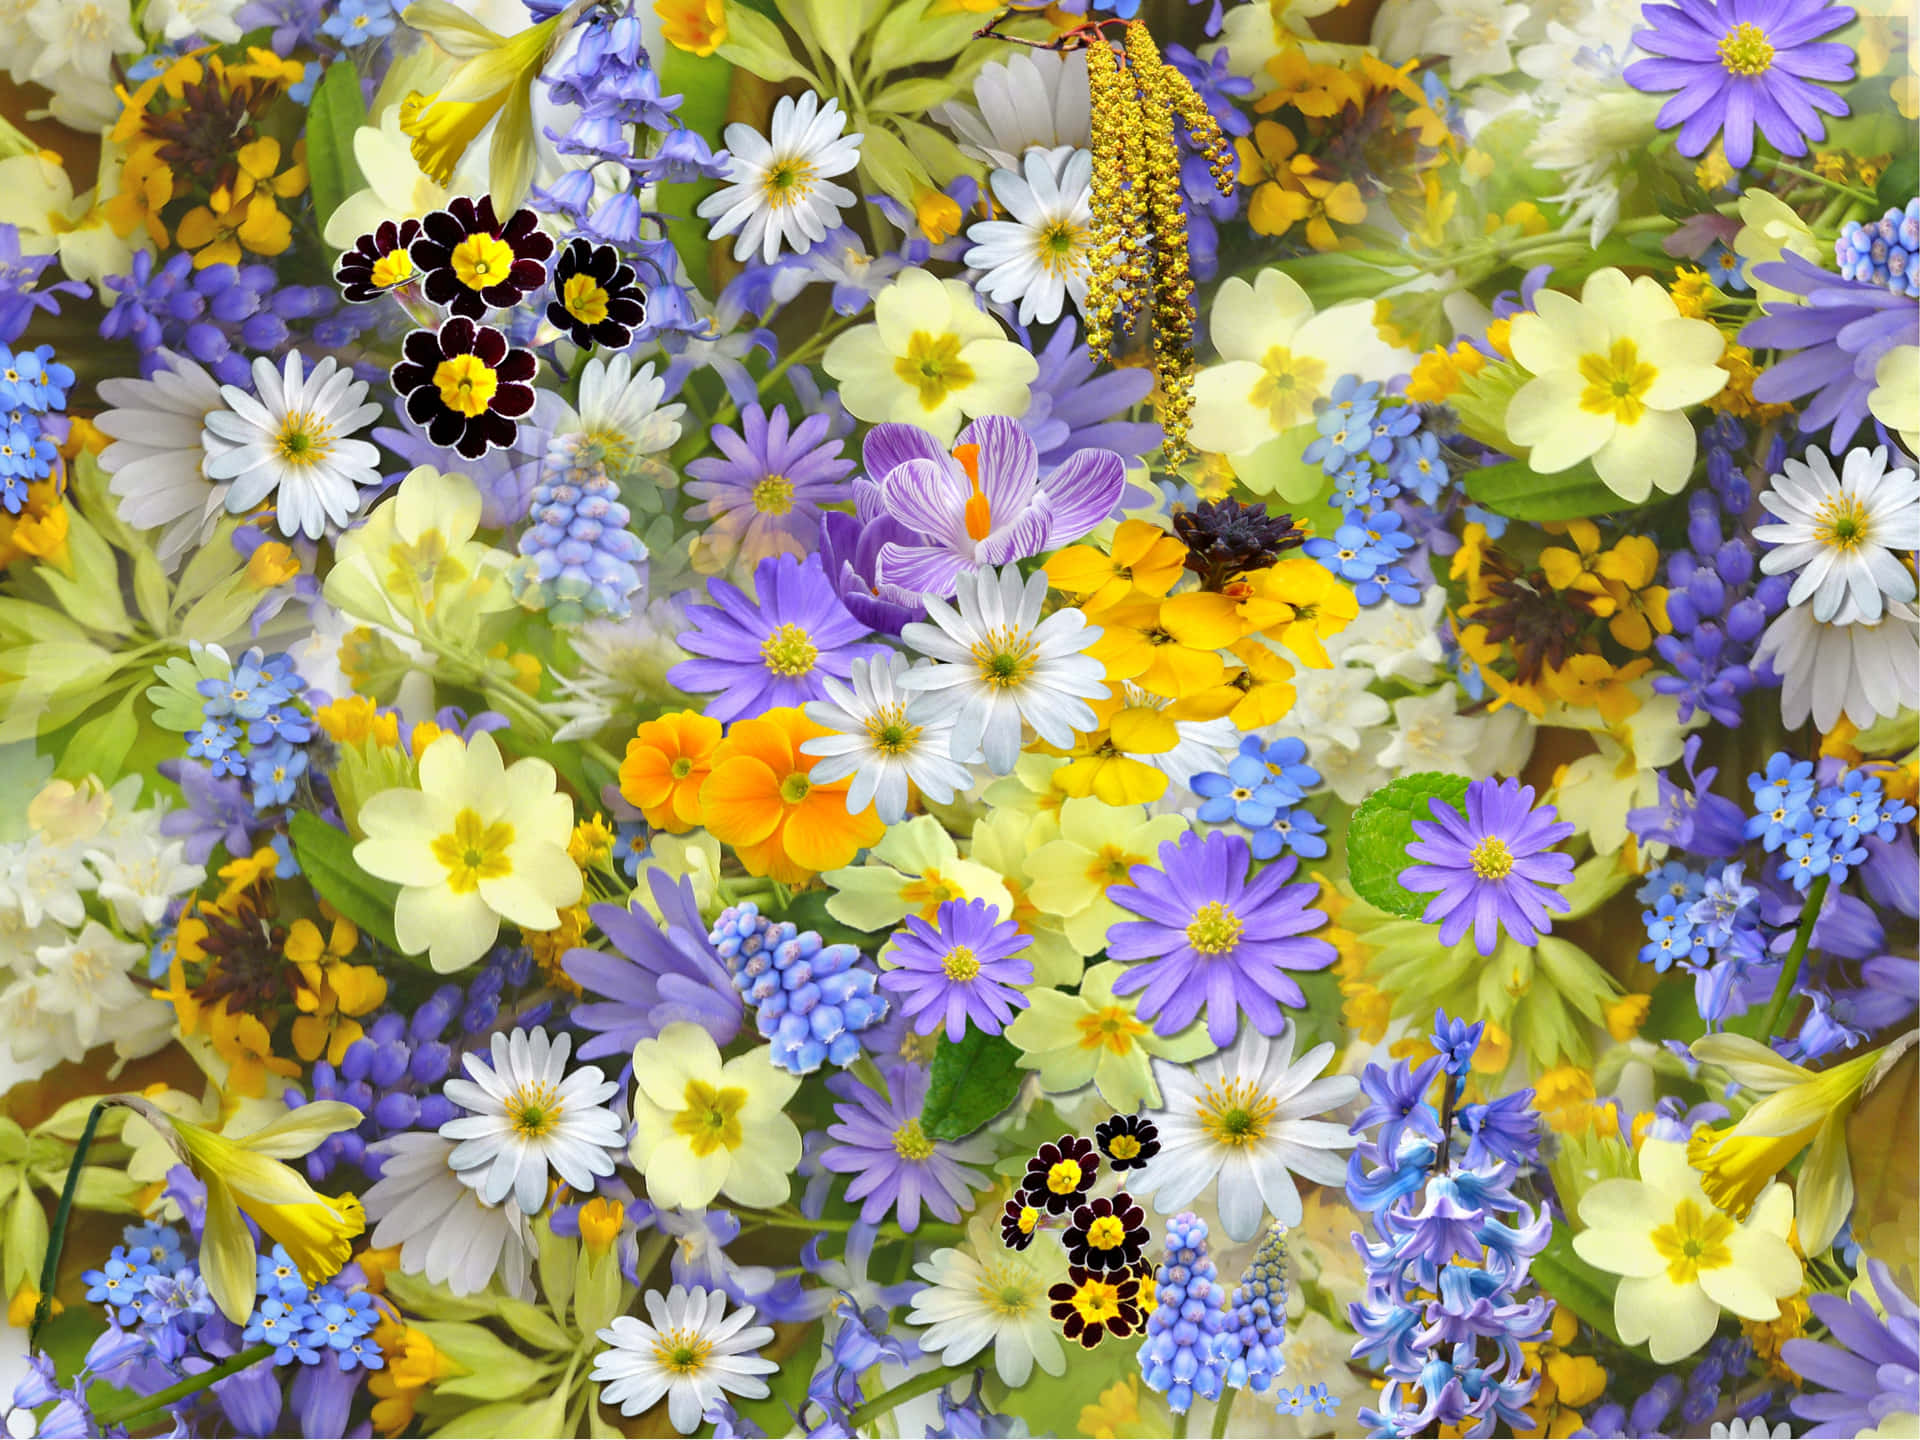 300+] Spring Flowers Background s 